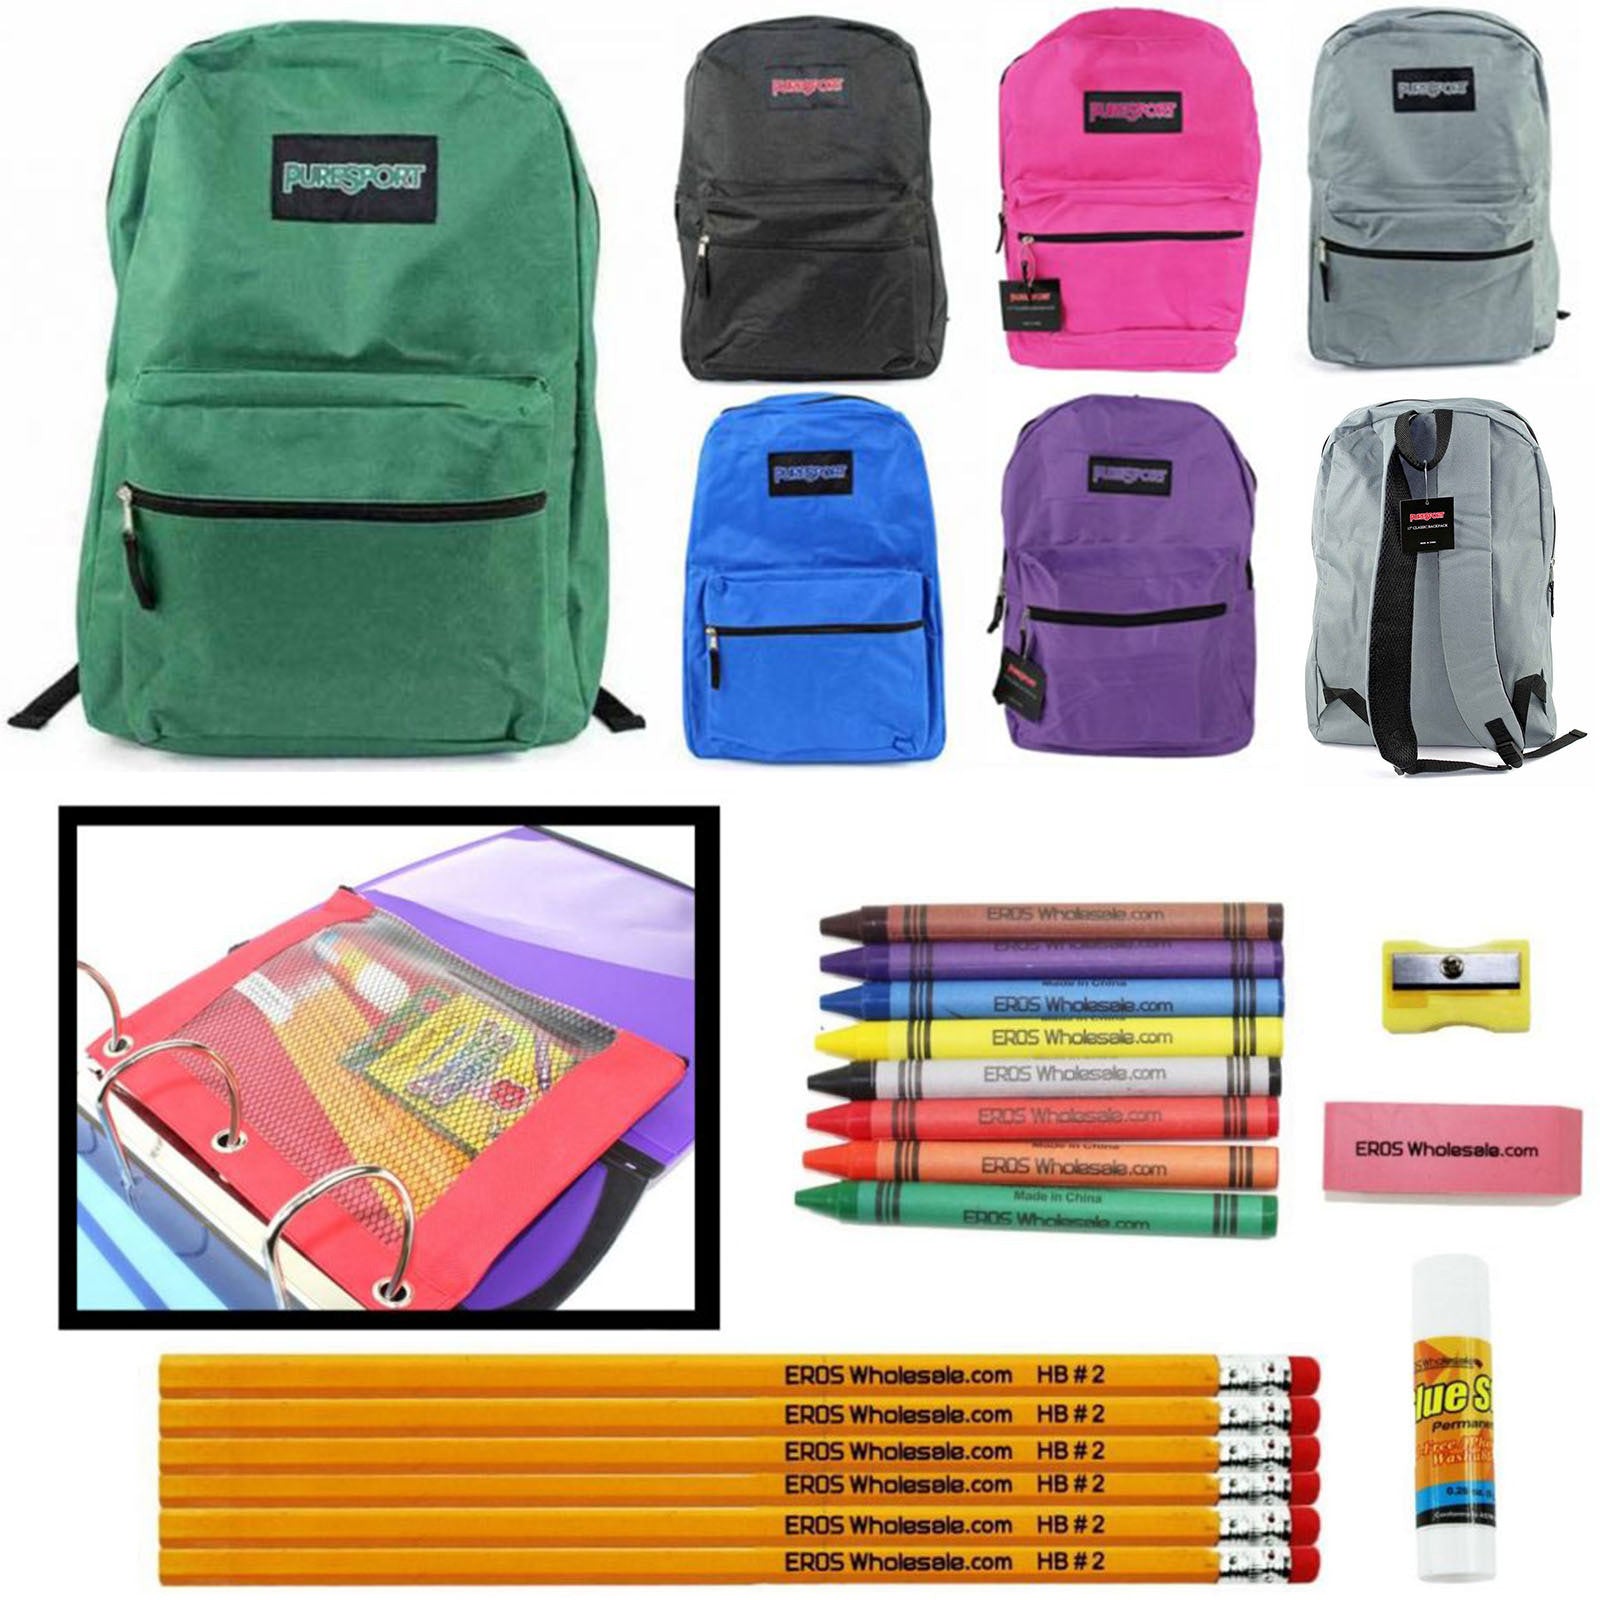 15 SOLID COLOR BACKPACKS W/ELEMENTARY SUPPLY KITS ITEM NUMBER